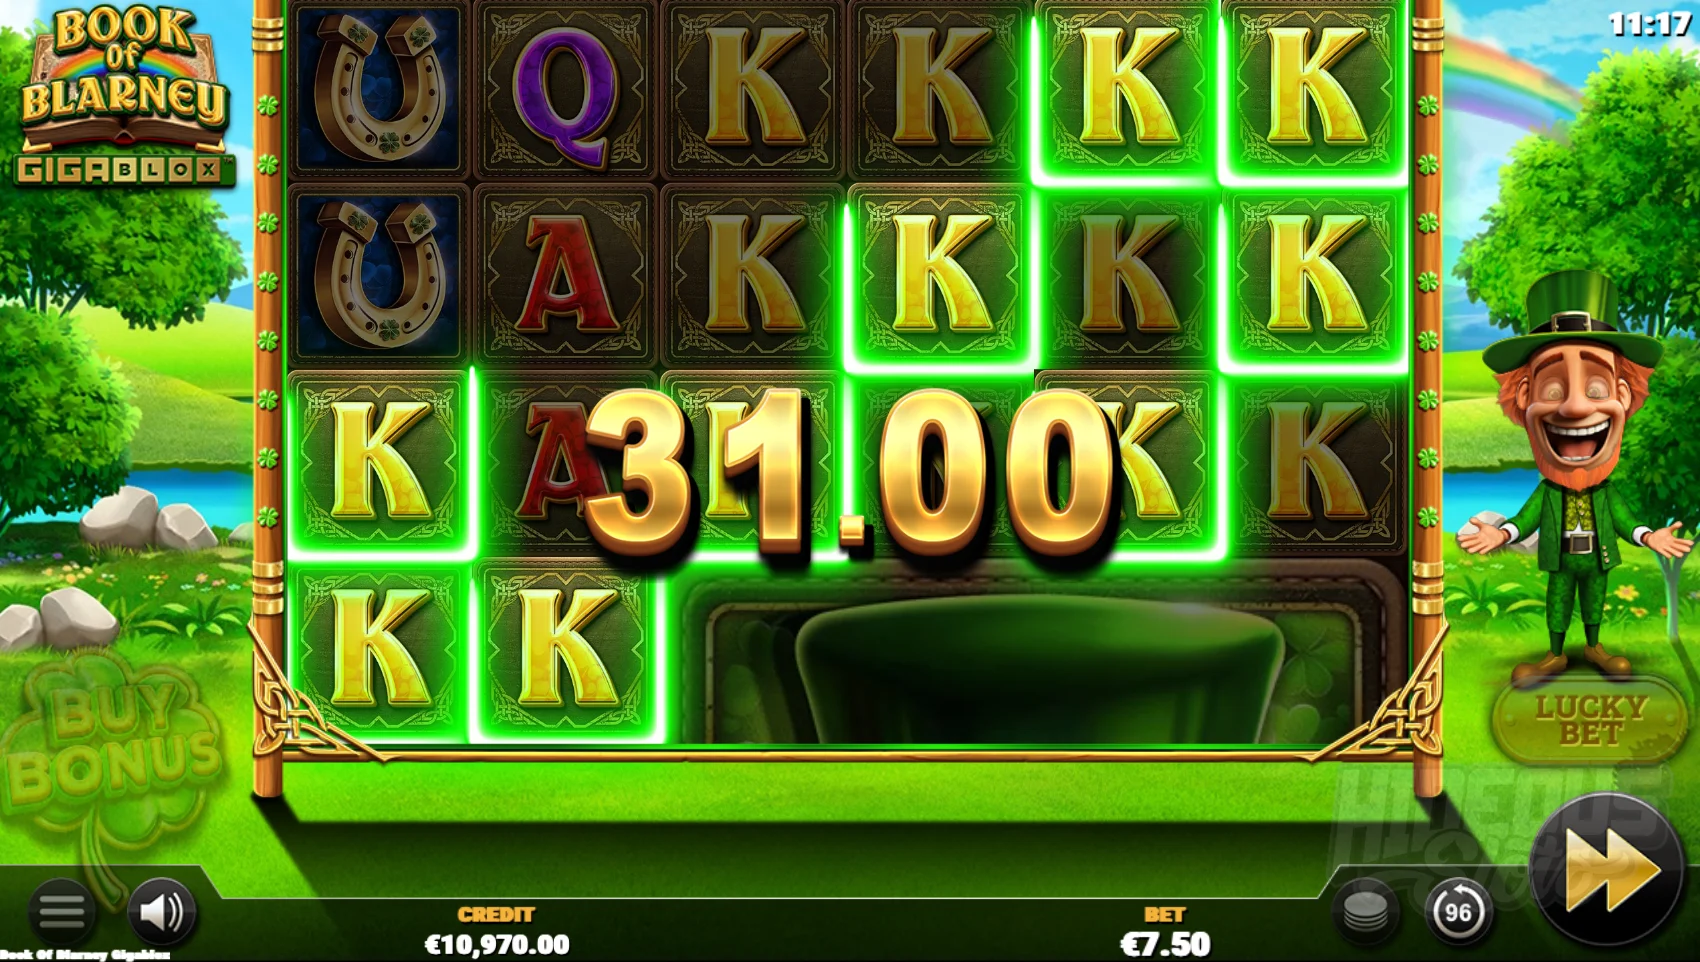 Book of Blarney Gigablox Offers Players 40 Fixed Win Lines